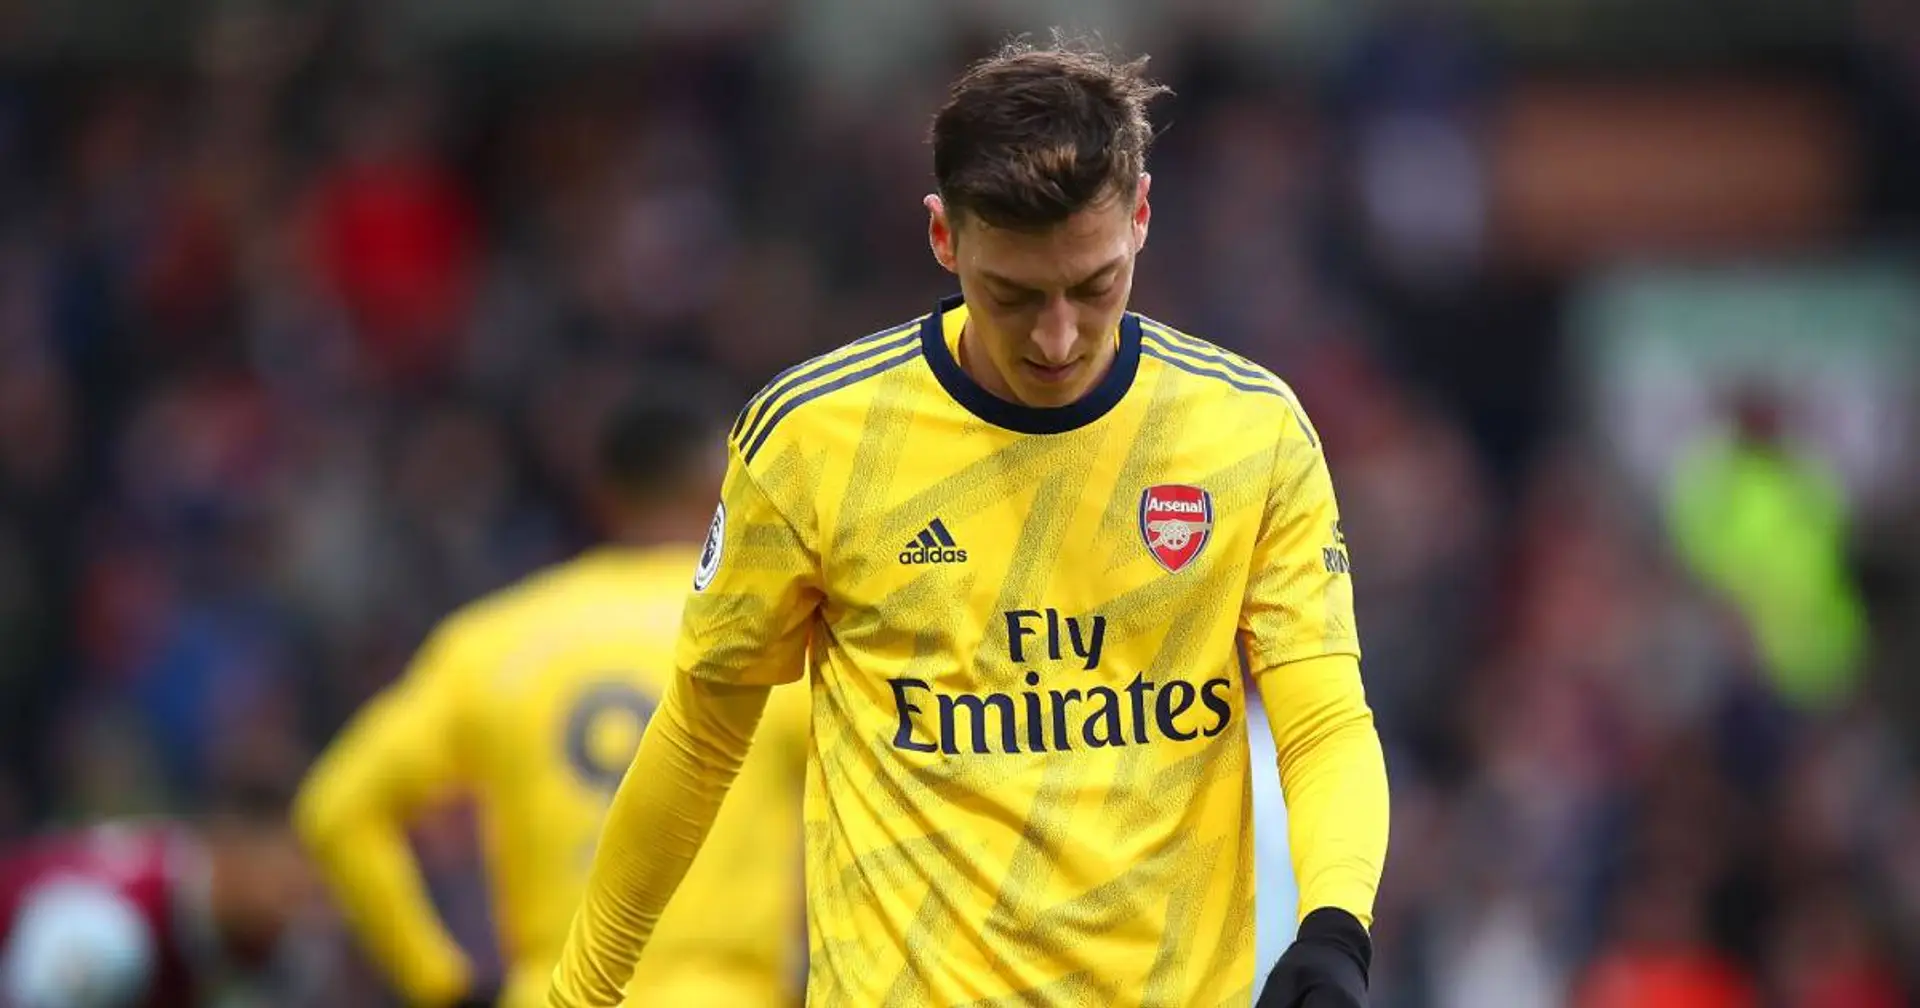 'There's no expectation that Ozil will be playing again for Arsenal': Ornstein convinced Mesut's time is up